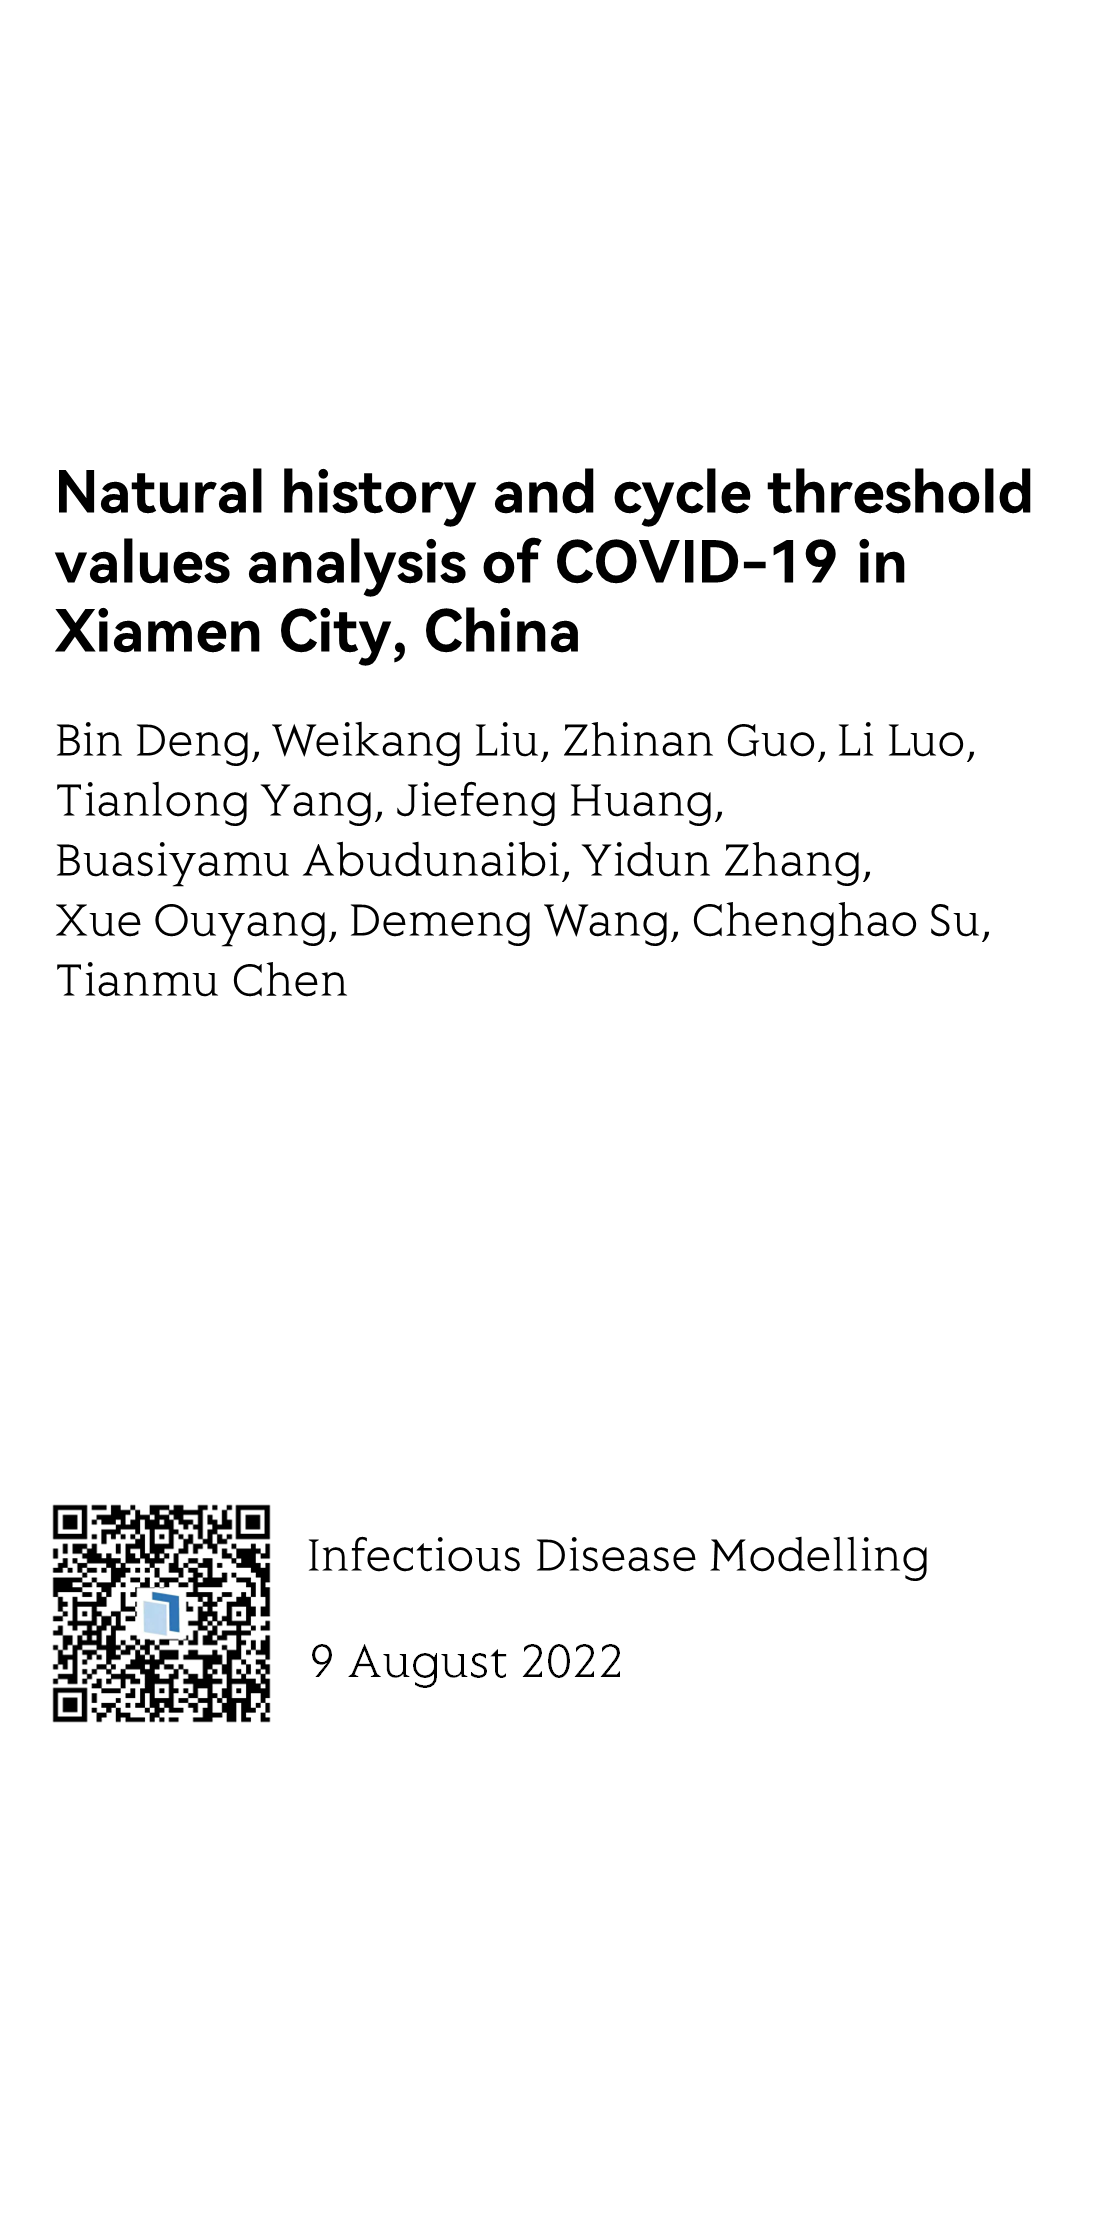 Natural history and cycle threshold values analysis of COVID-19 in Xiamen City, China_1